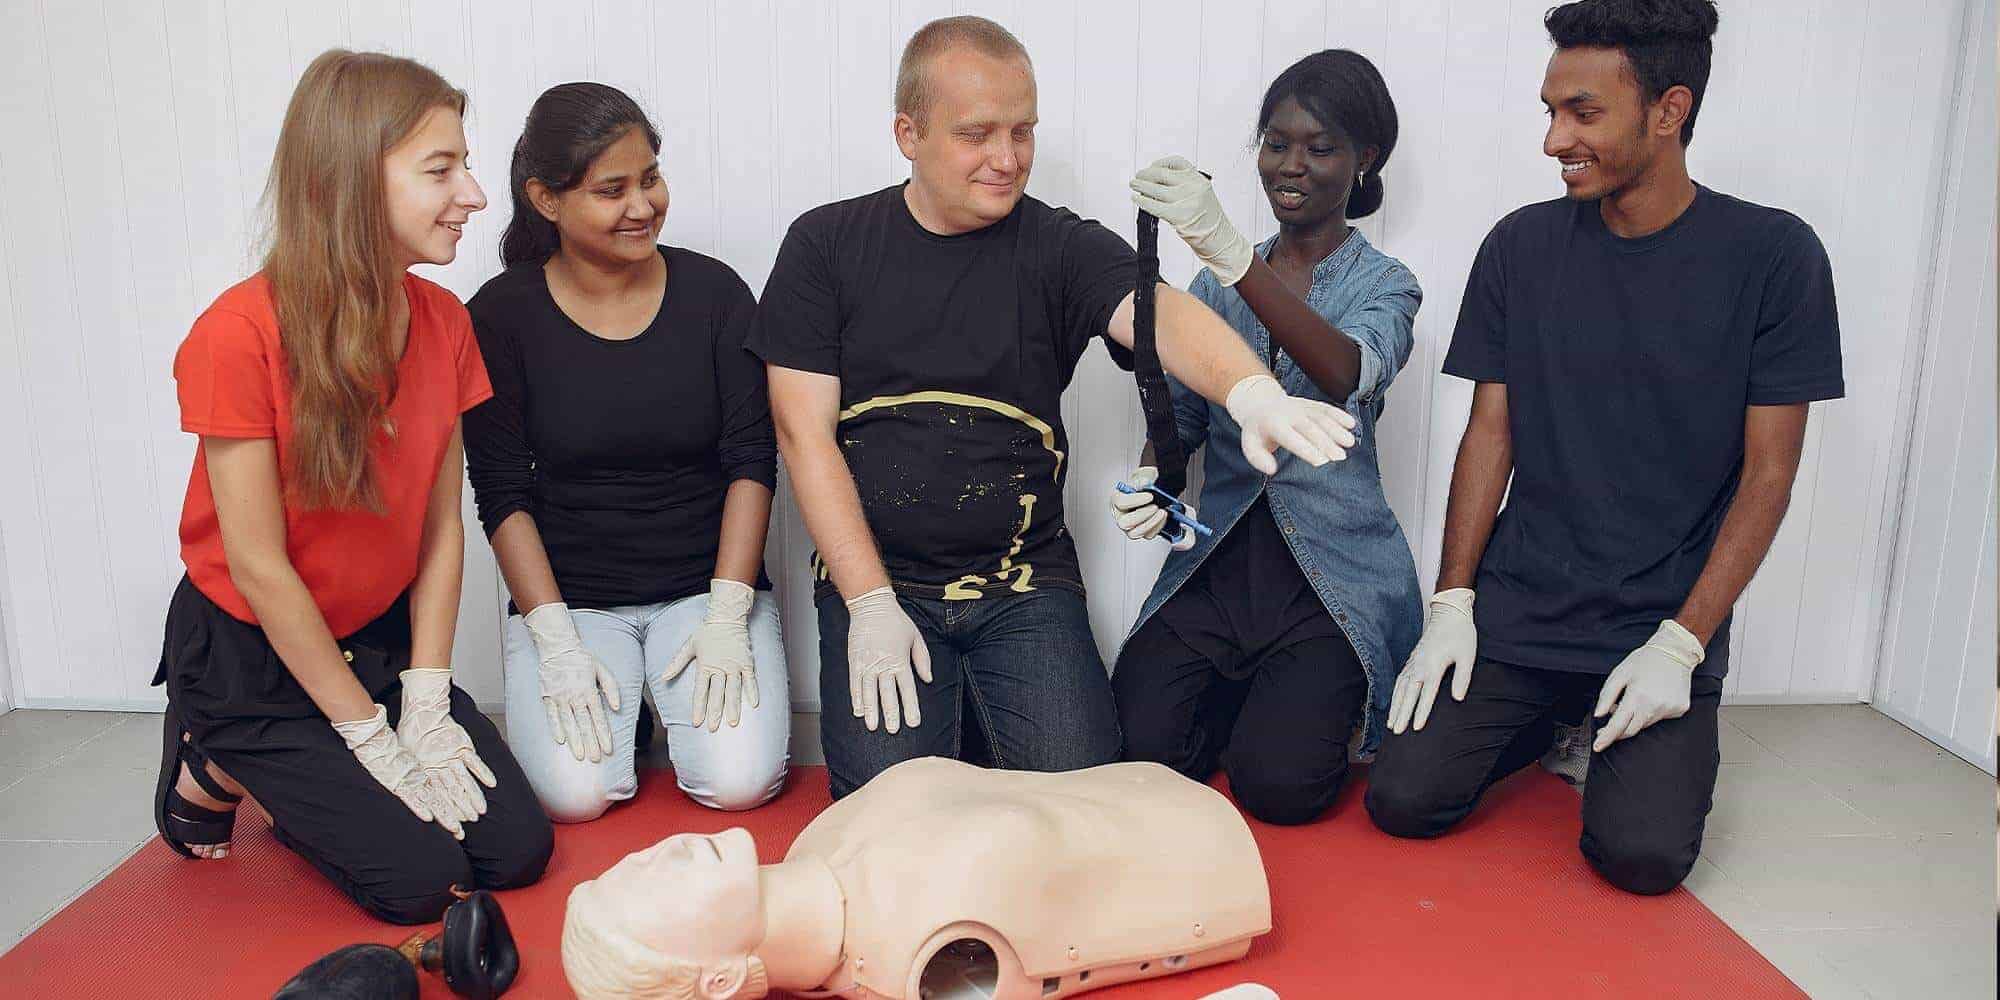 First aid training in the workplace